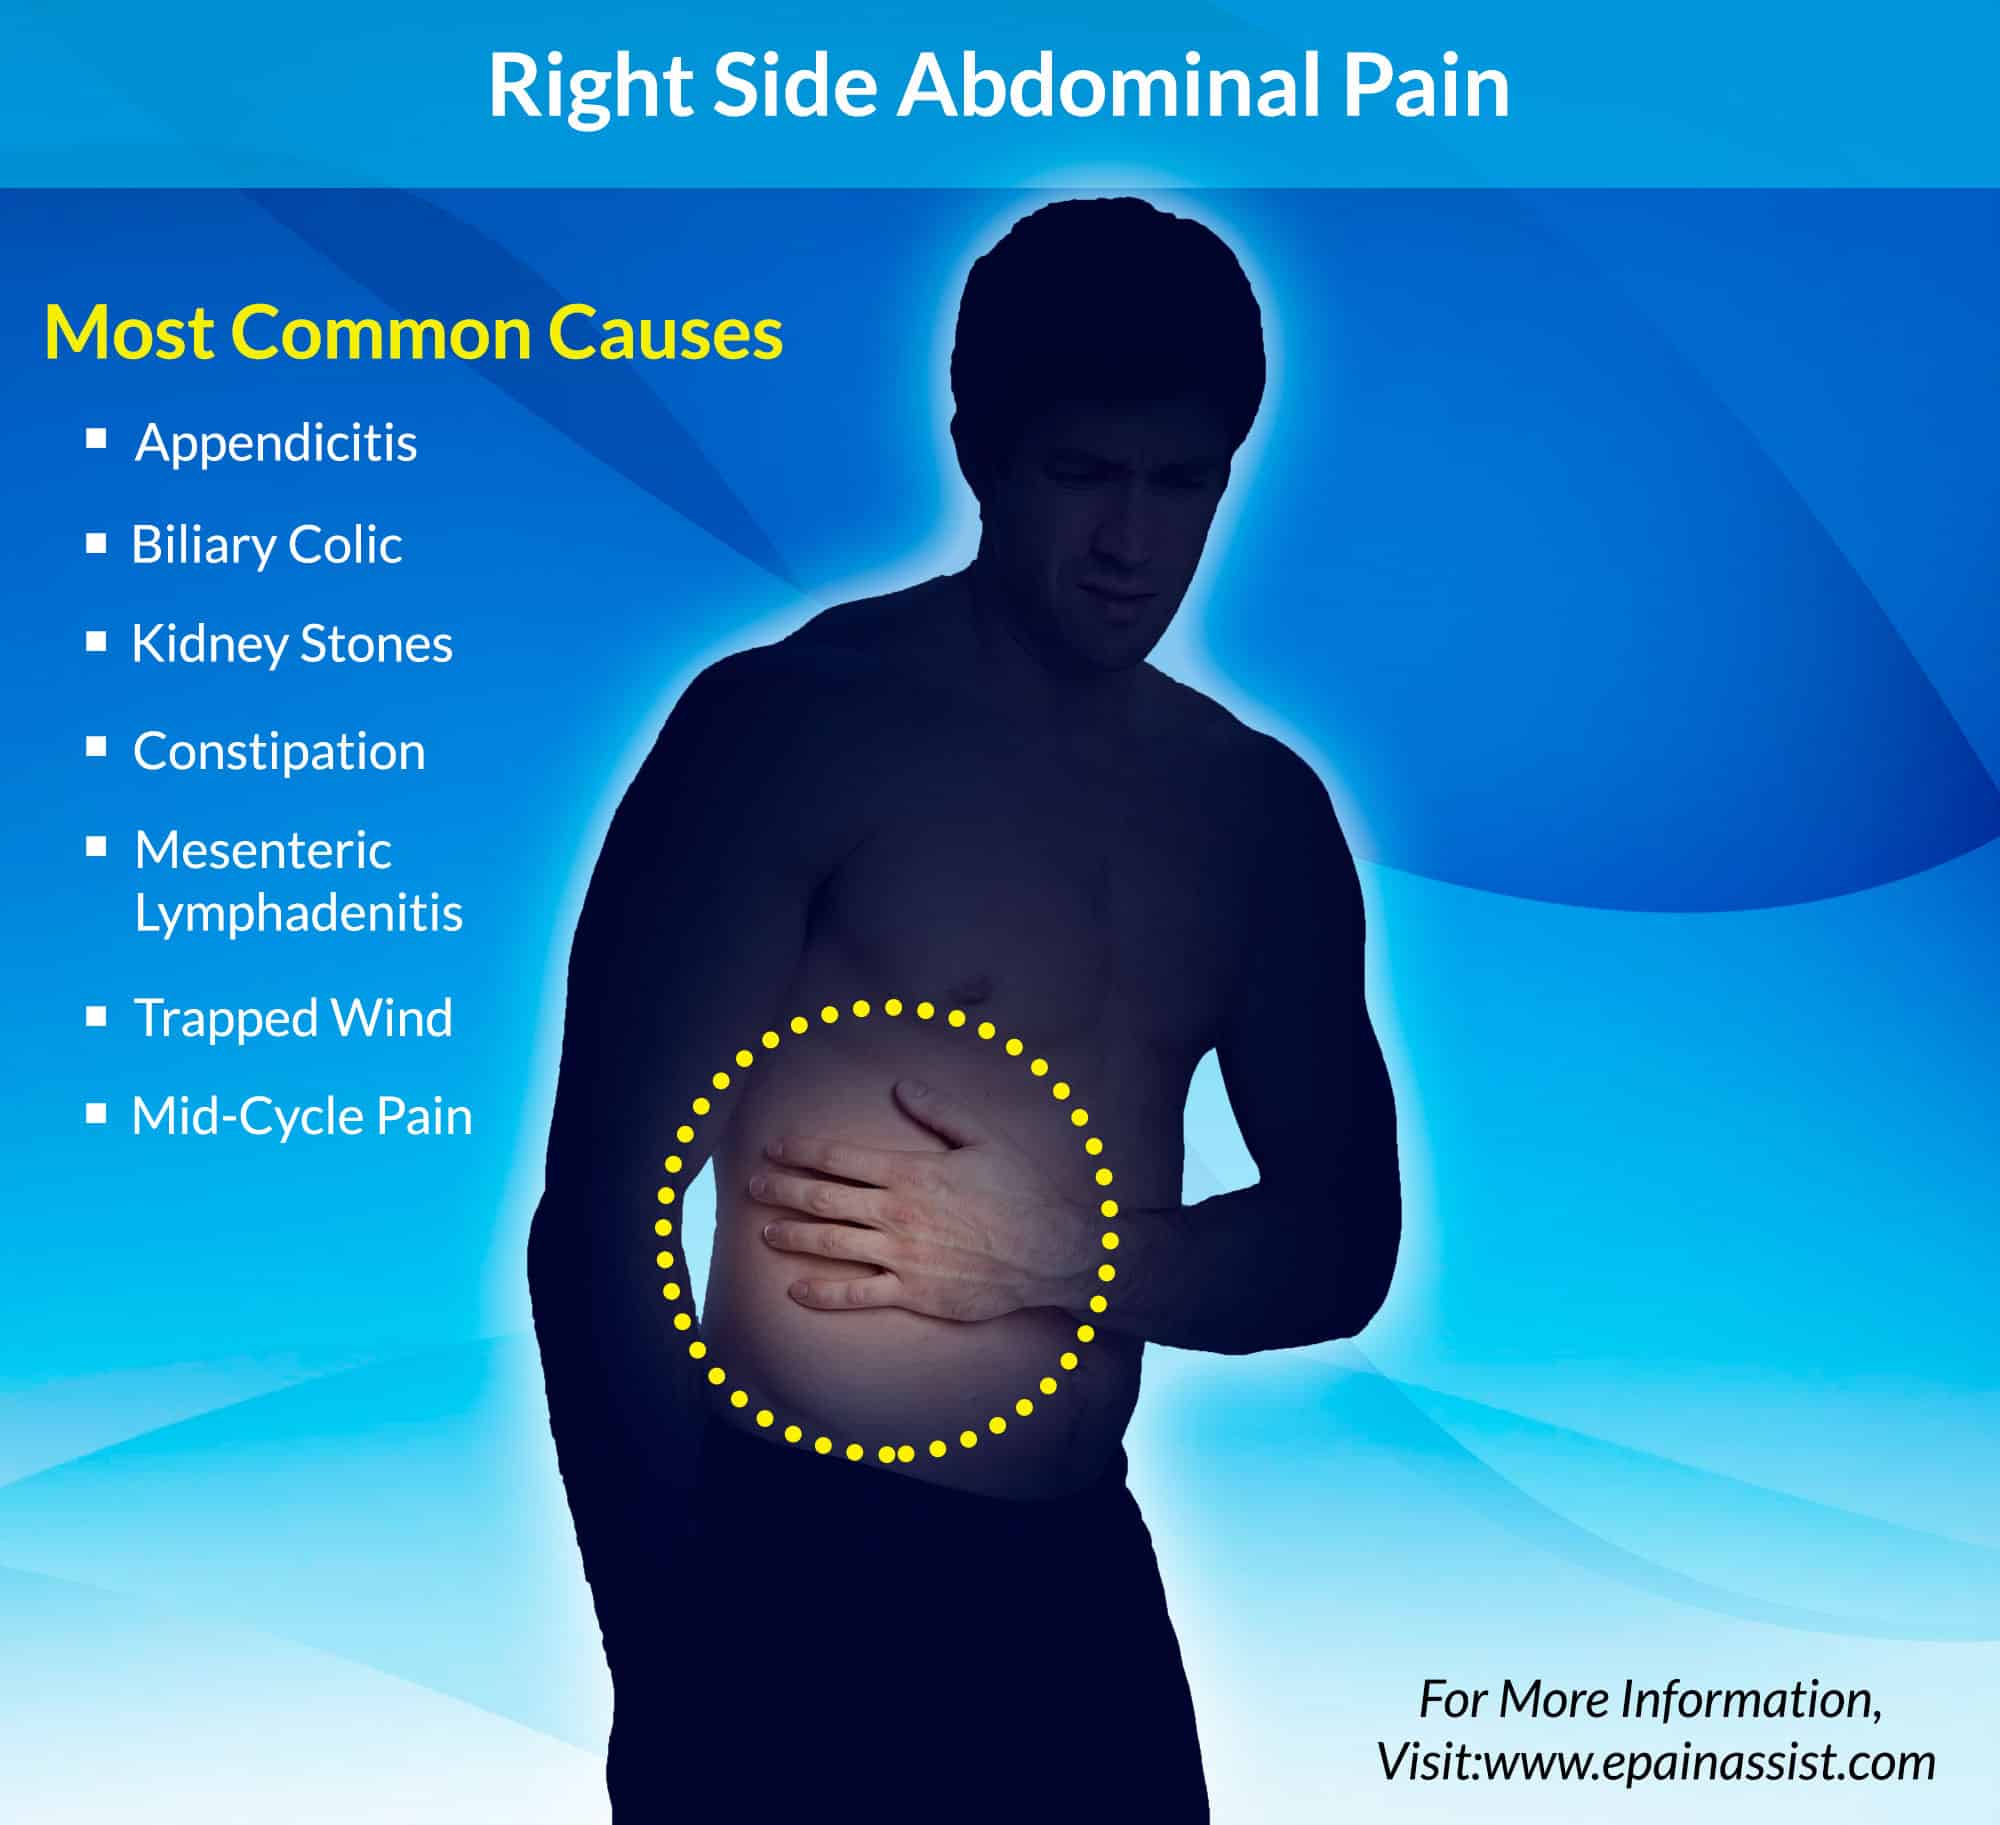 What Can Cause Right Side Abdominal Pain?